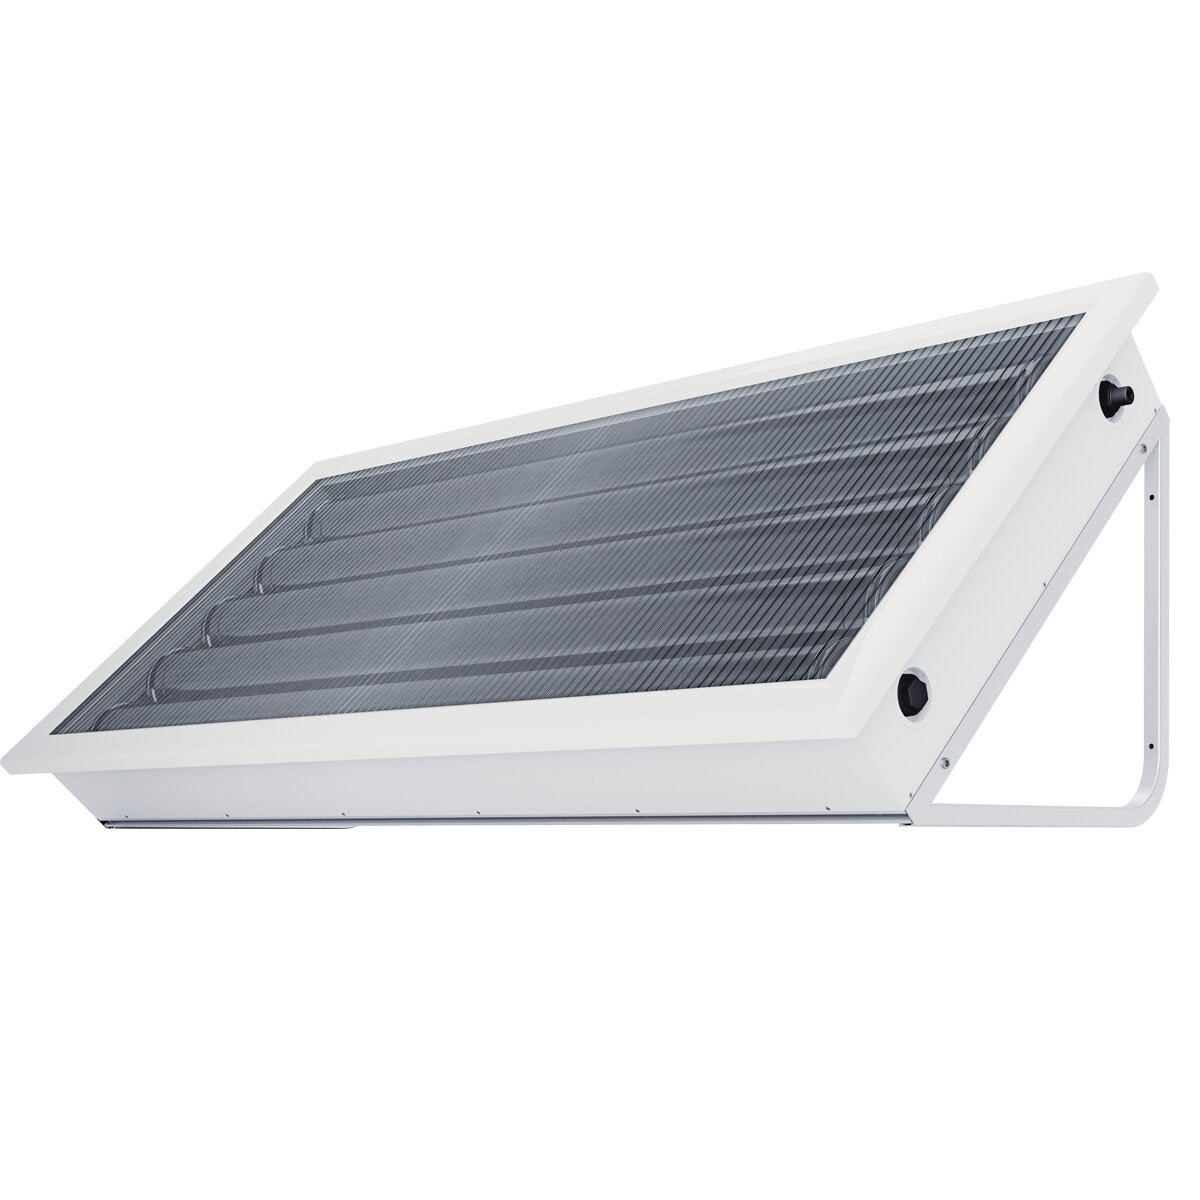 Natural circulation solar panel Pleion Ego 150 white 140 liters with installation accessories